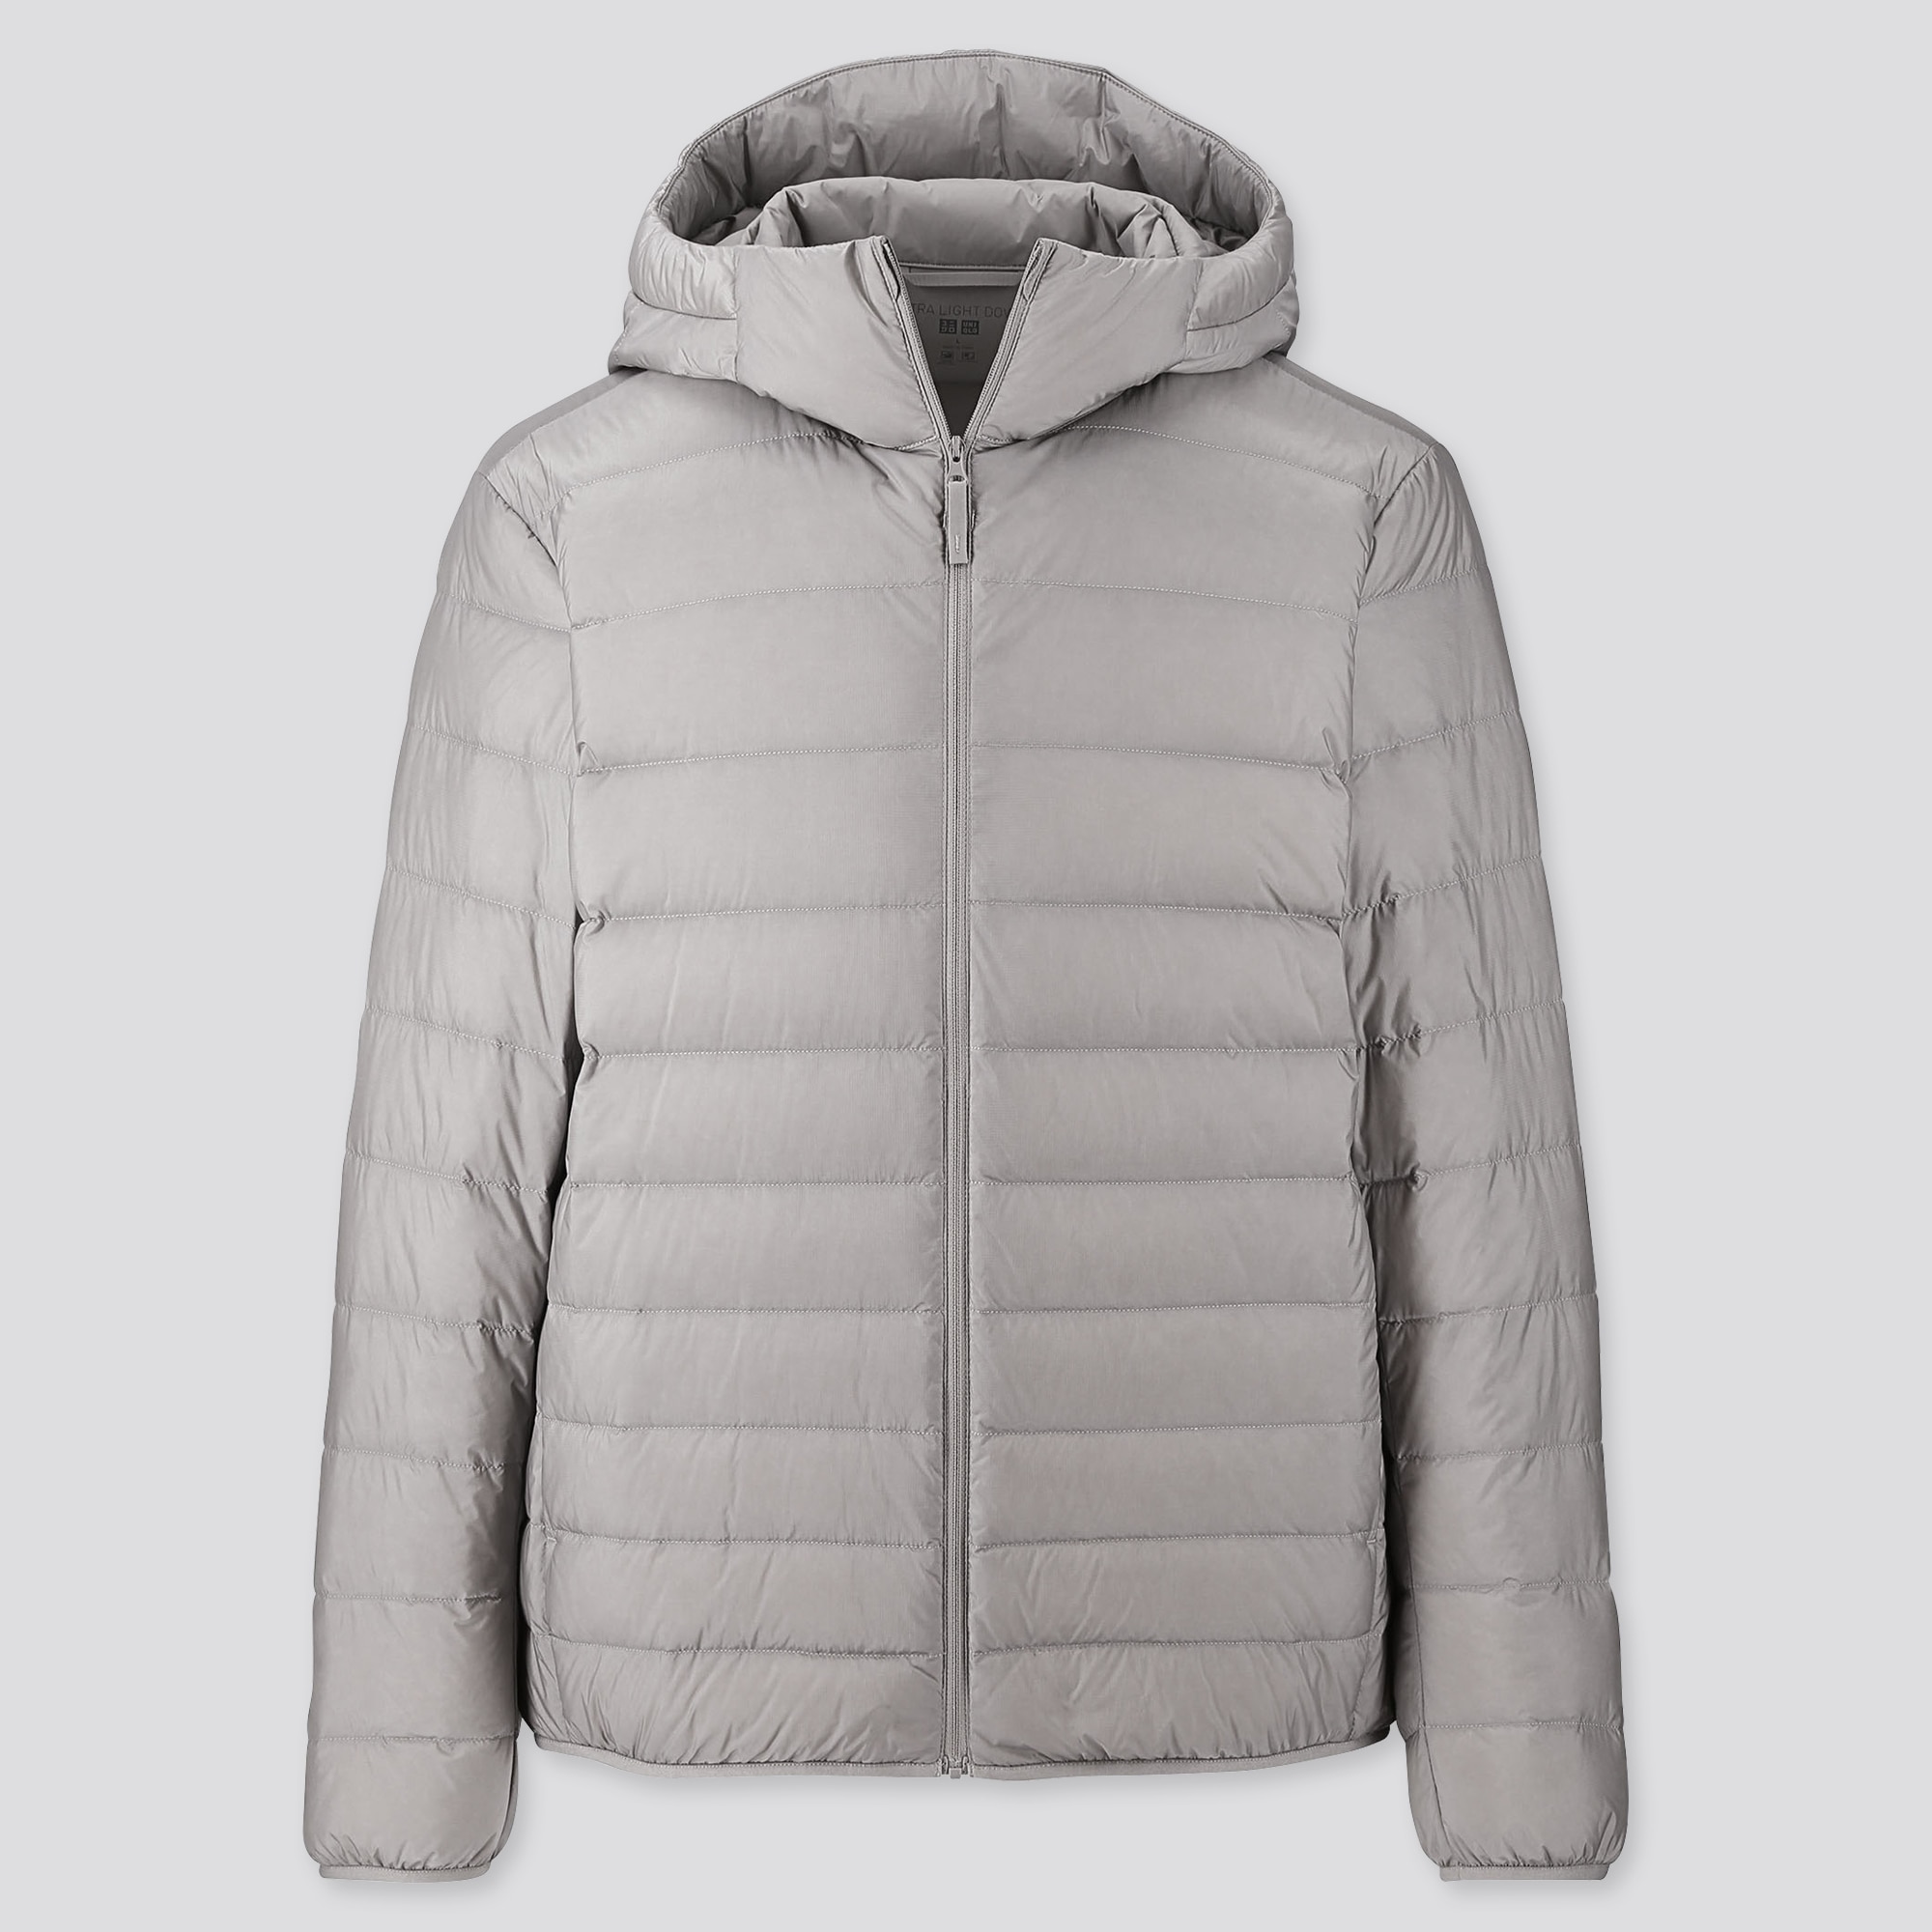 uniqlo packable down jacket